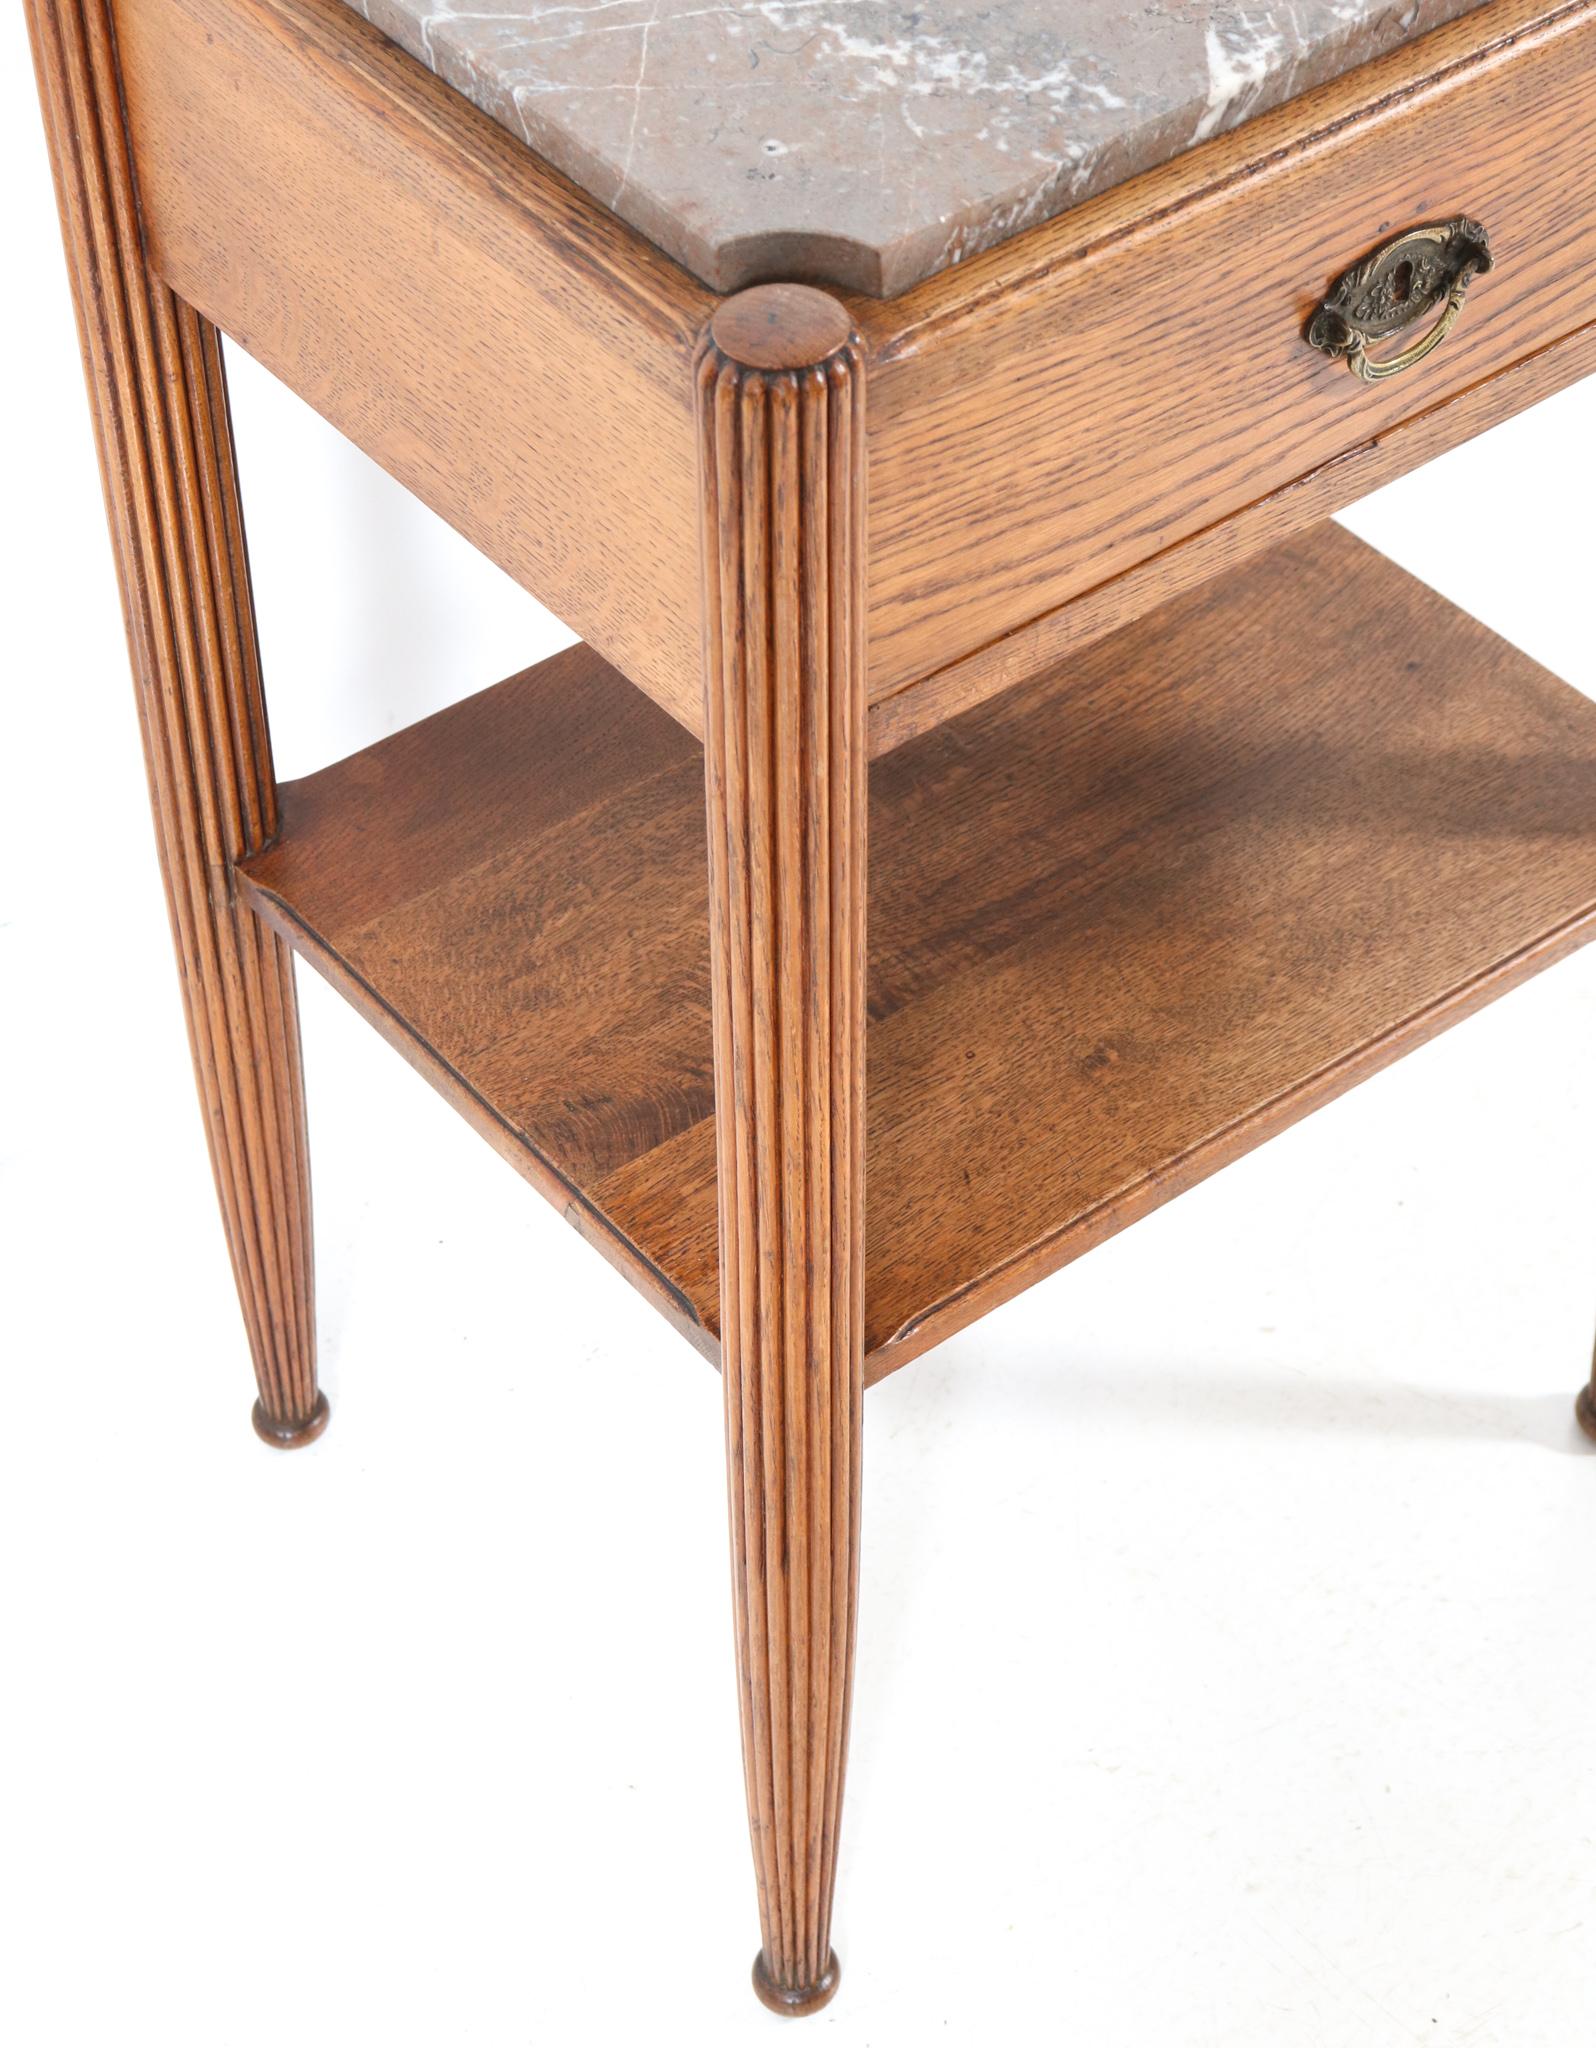 Oak Art Deco Side Table with Marble Top, 1930s For Sale 3